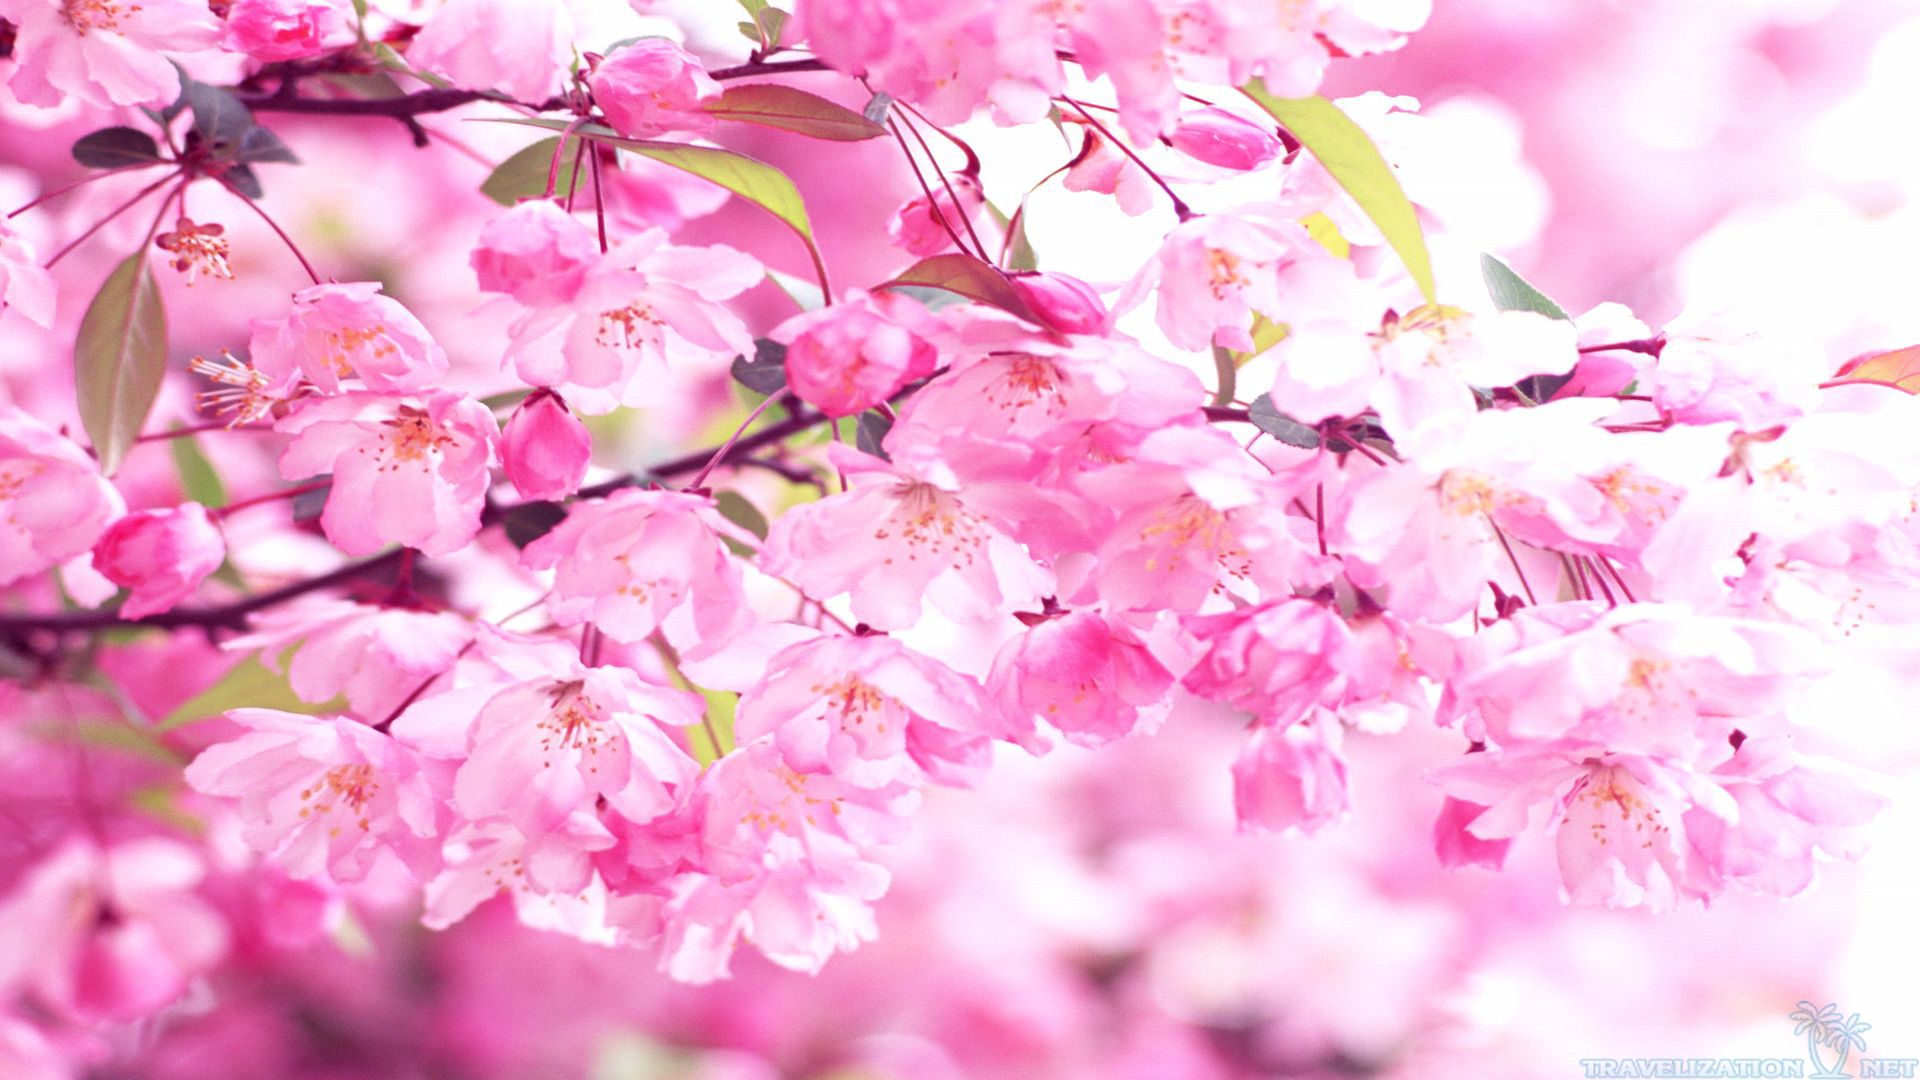 Cherry Blossom Wallpaper Stunning Awesome Photos 16054